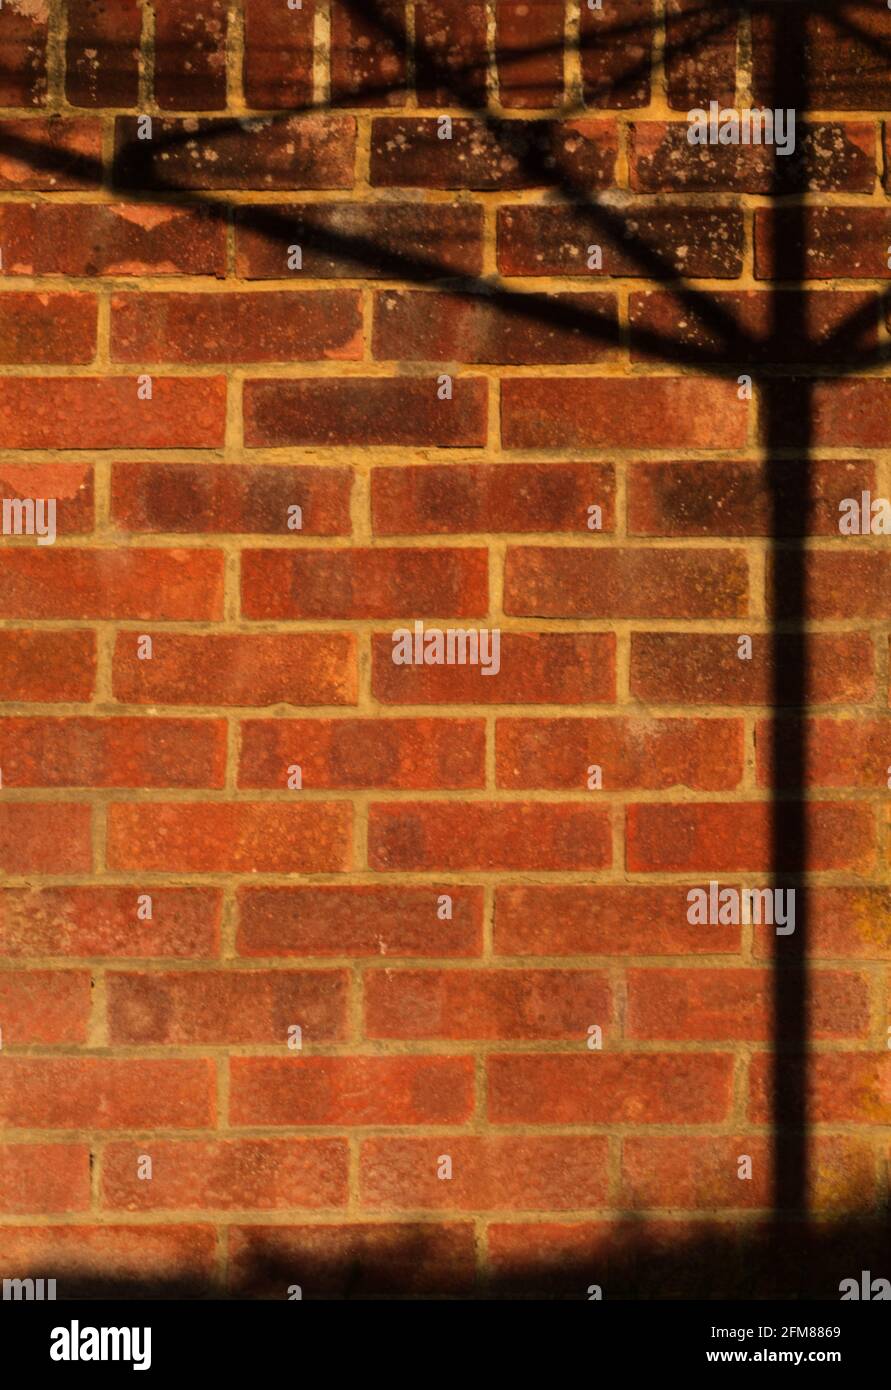 clothes line shadow against brick wall Stock Photo